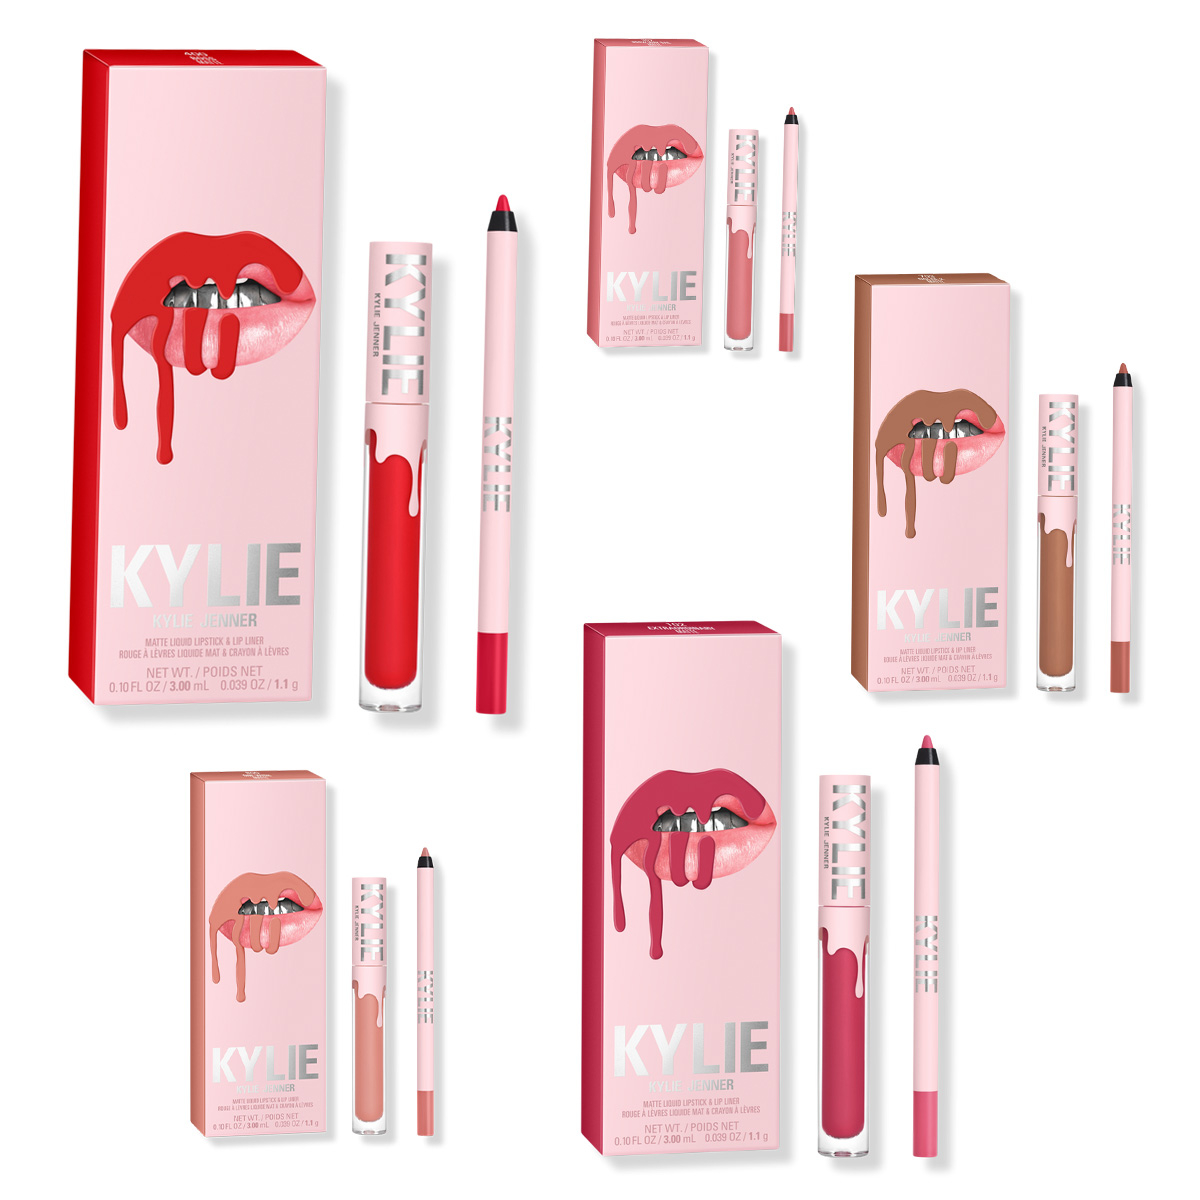 Don't Miss This Kylie Cosmetics Flash Deal: Buy 1 Lip Get 1 Free - E! Online